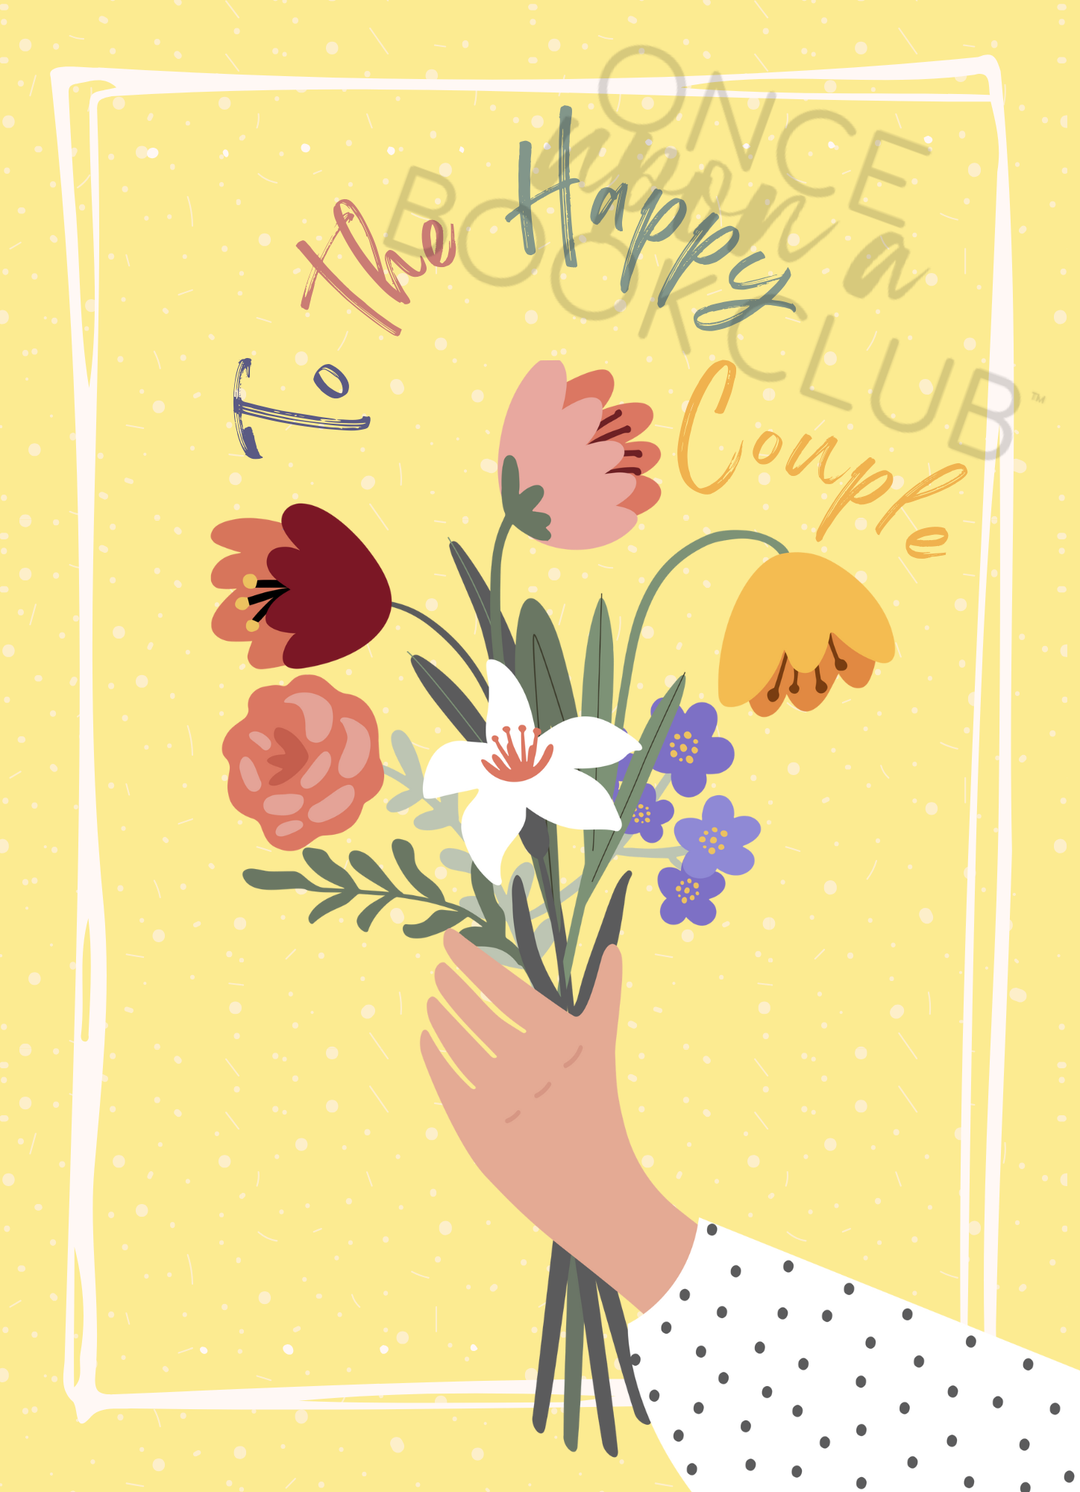 A yellow card with "To the Happy Couple" and an illustrated hand holding a multicolored flower bouquet on front cover.